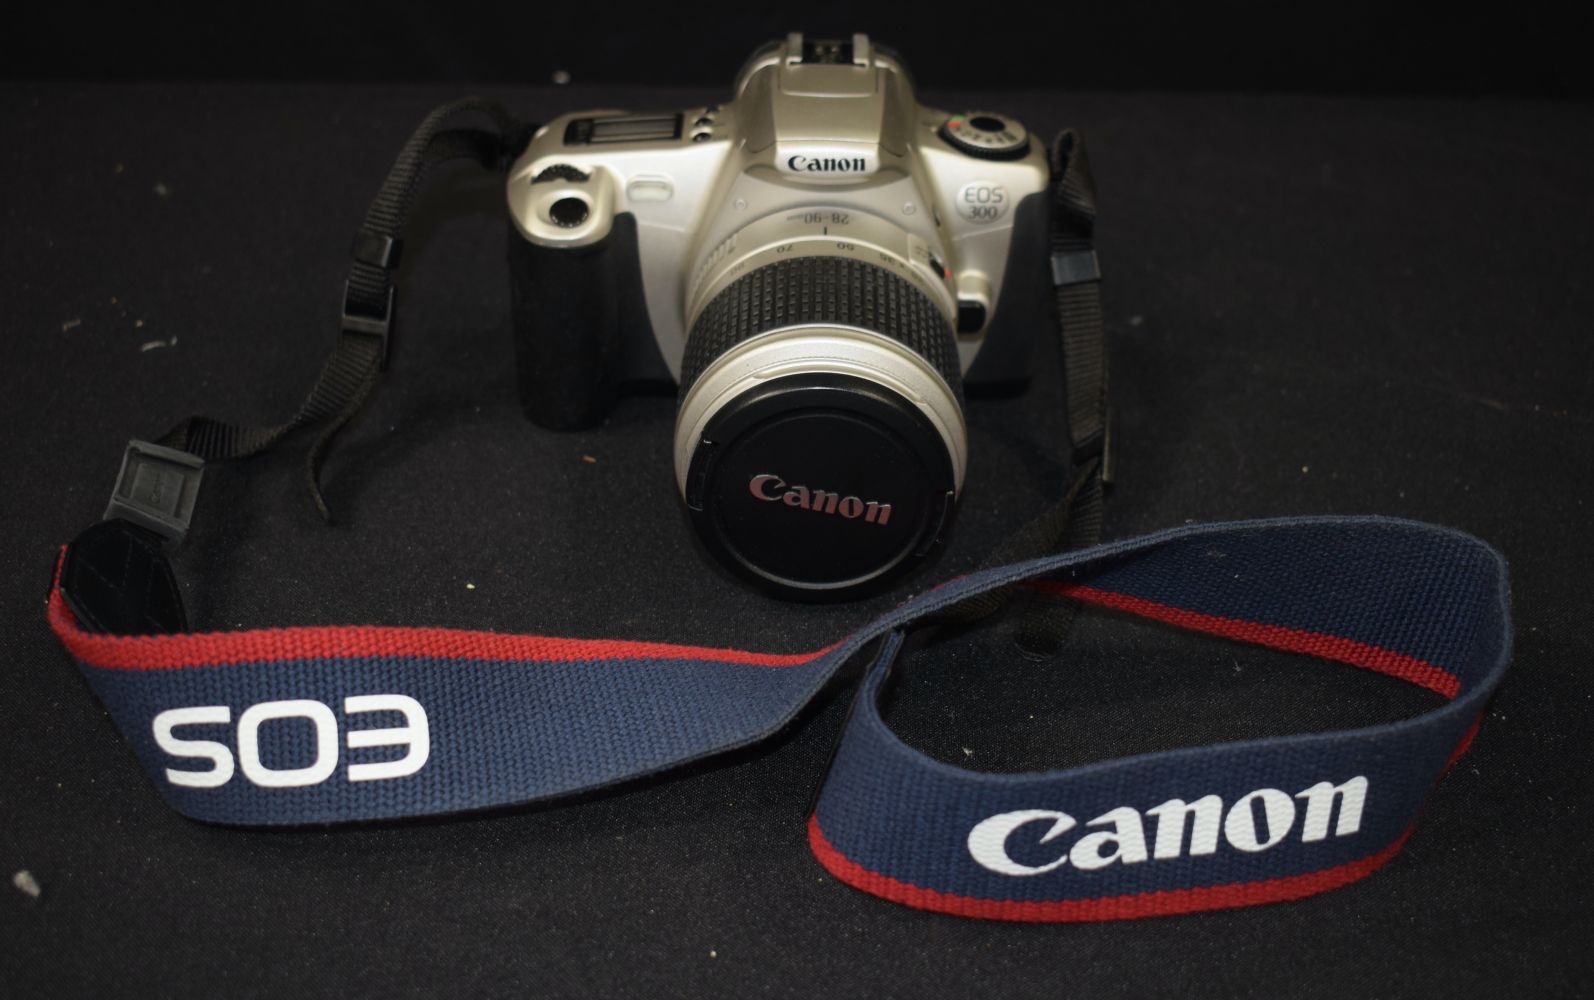 A collection of Cameras, Nikomat FT , Olympus IS 300, Cannon EOS 300 together with Accessories (5). - Image 6 of 8